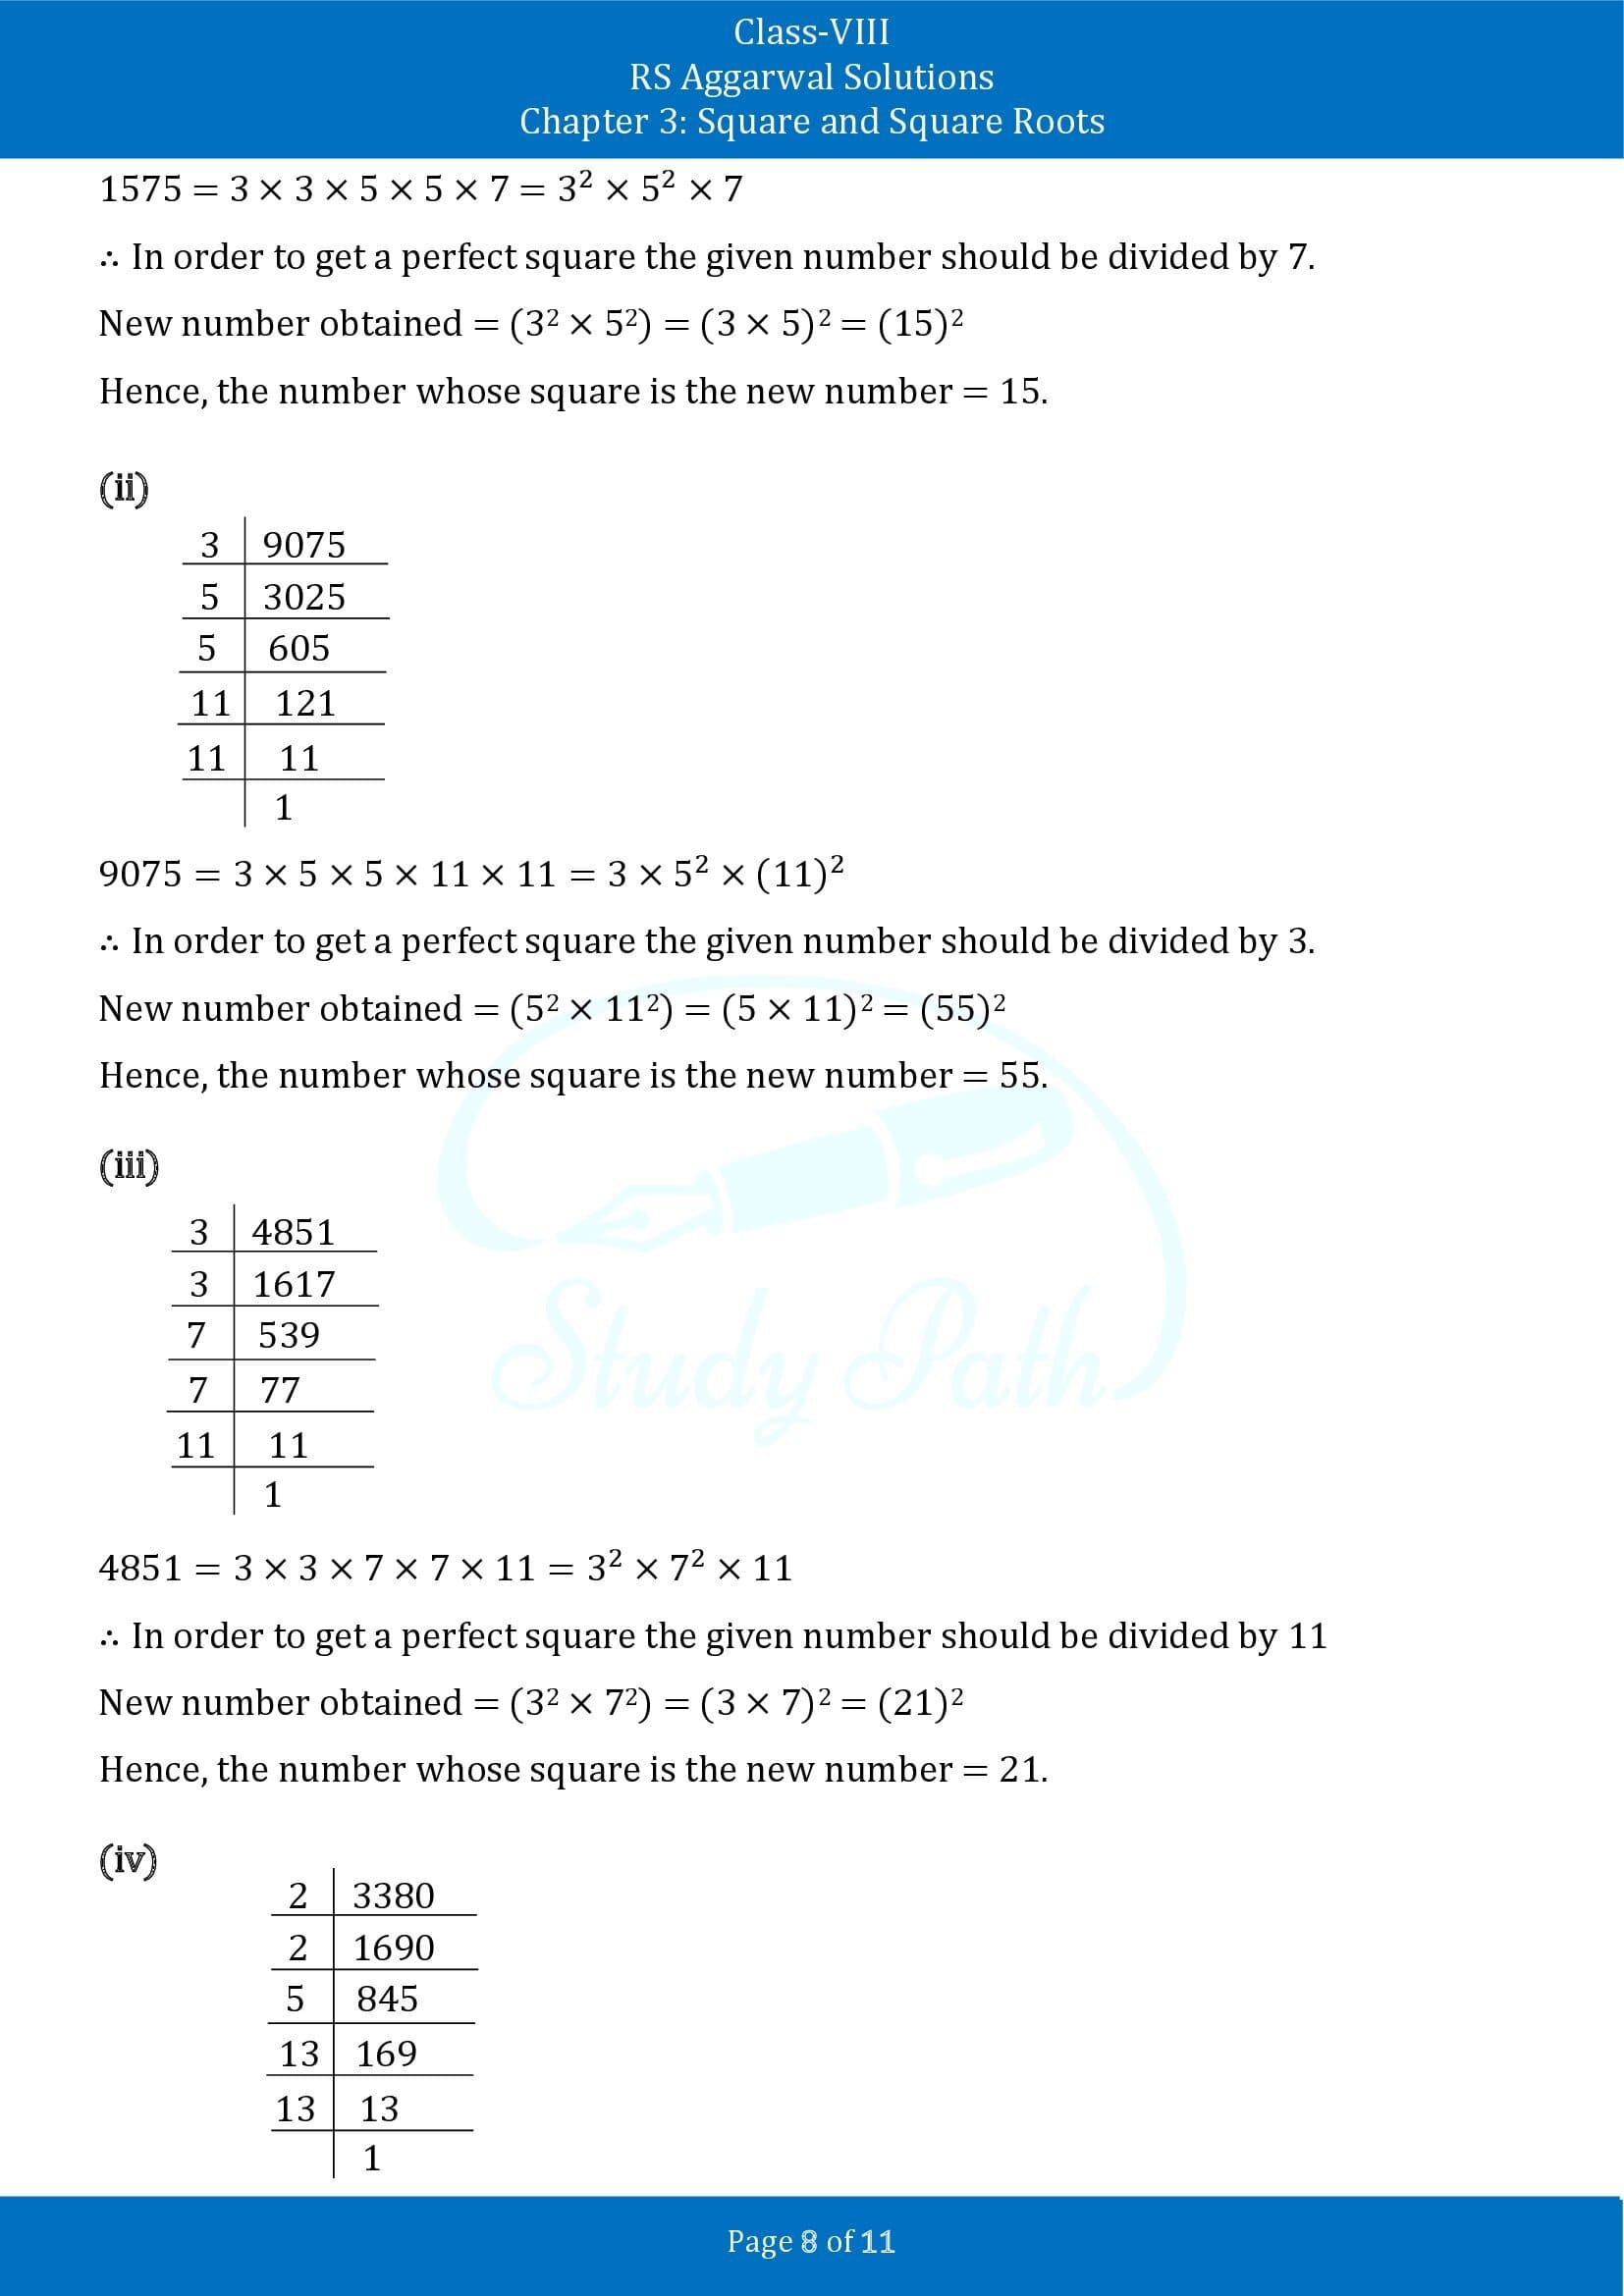 RS Aggarwal Solutions Class 8 Chapter 3 Square and Square Roots Exercise 3A 00008